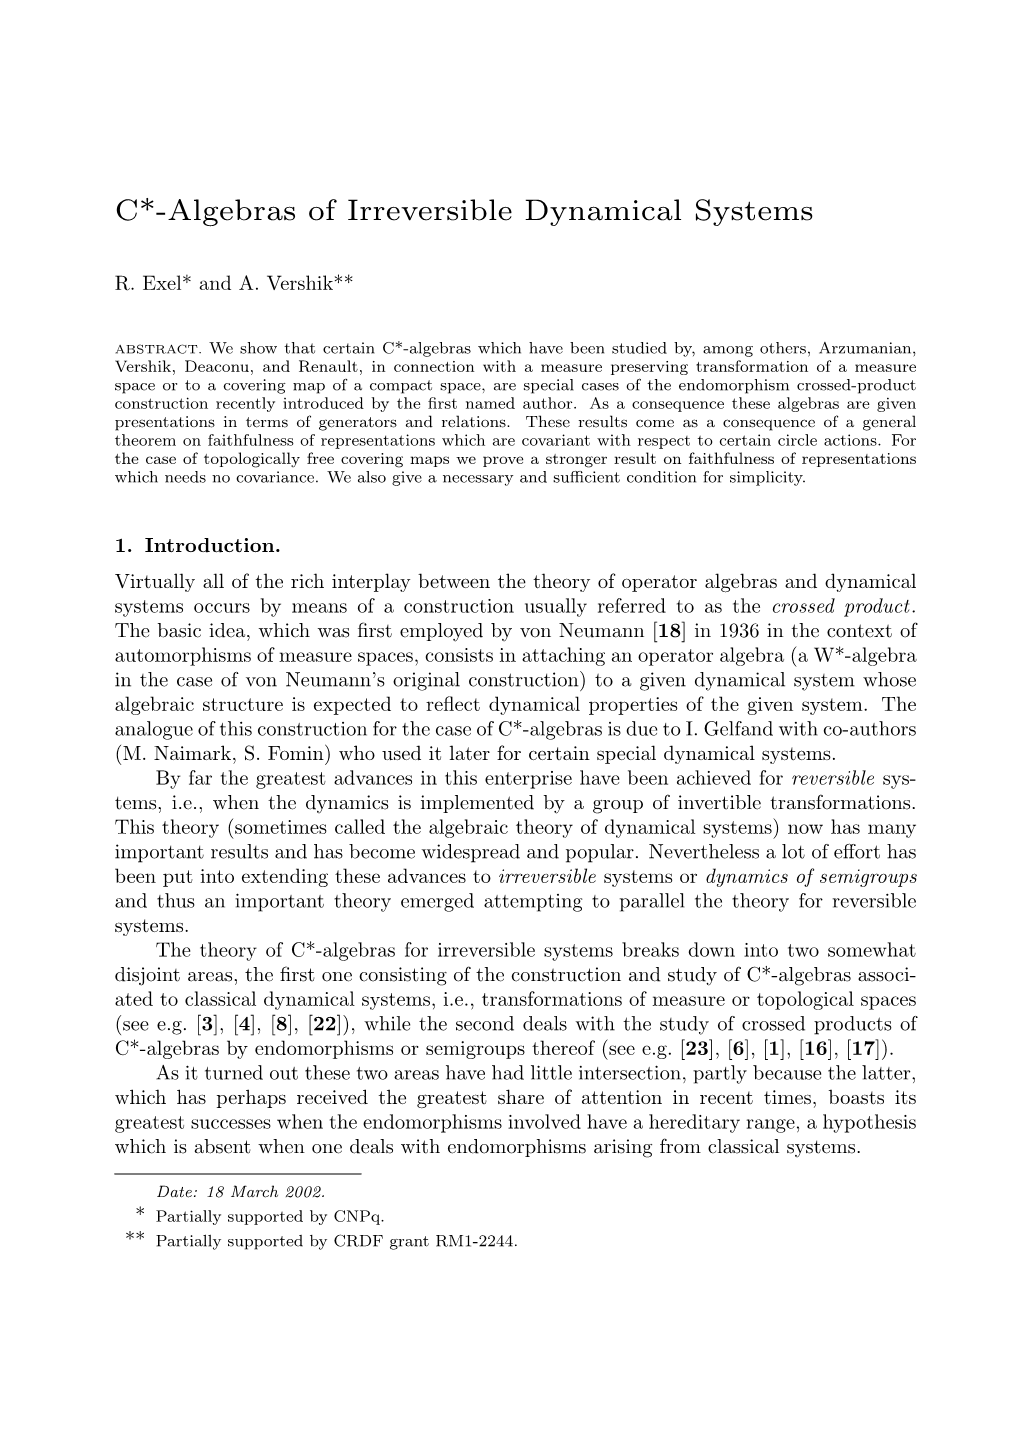 C*-Algebras of Irreversible Dynamical Systems